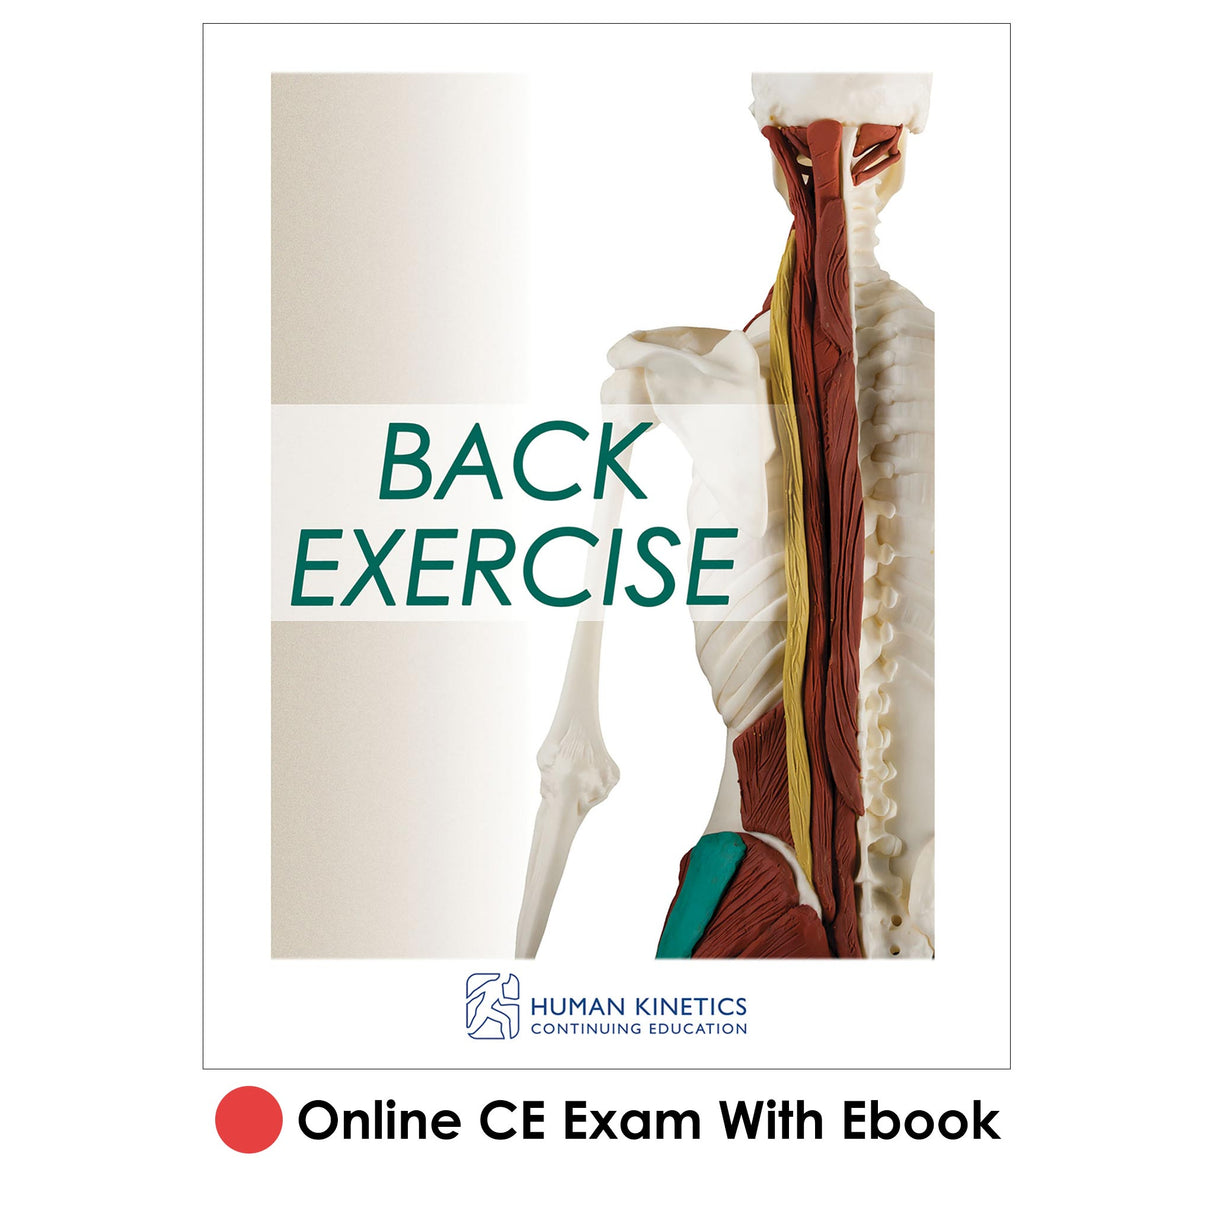 Back Exercise Online CE Exam With Ebook